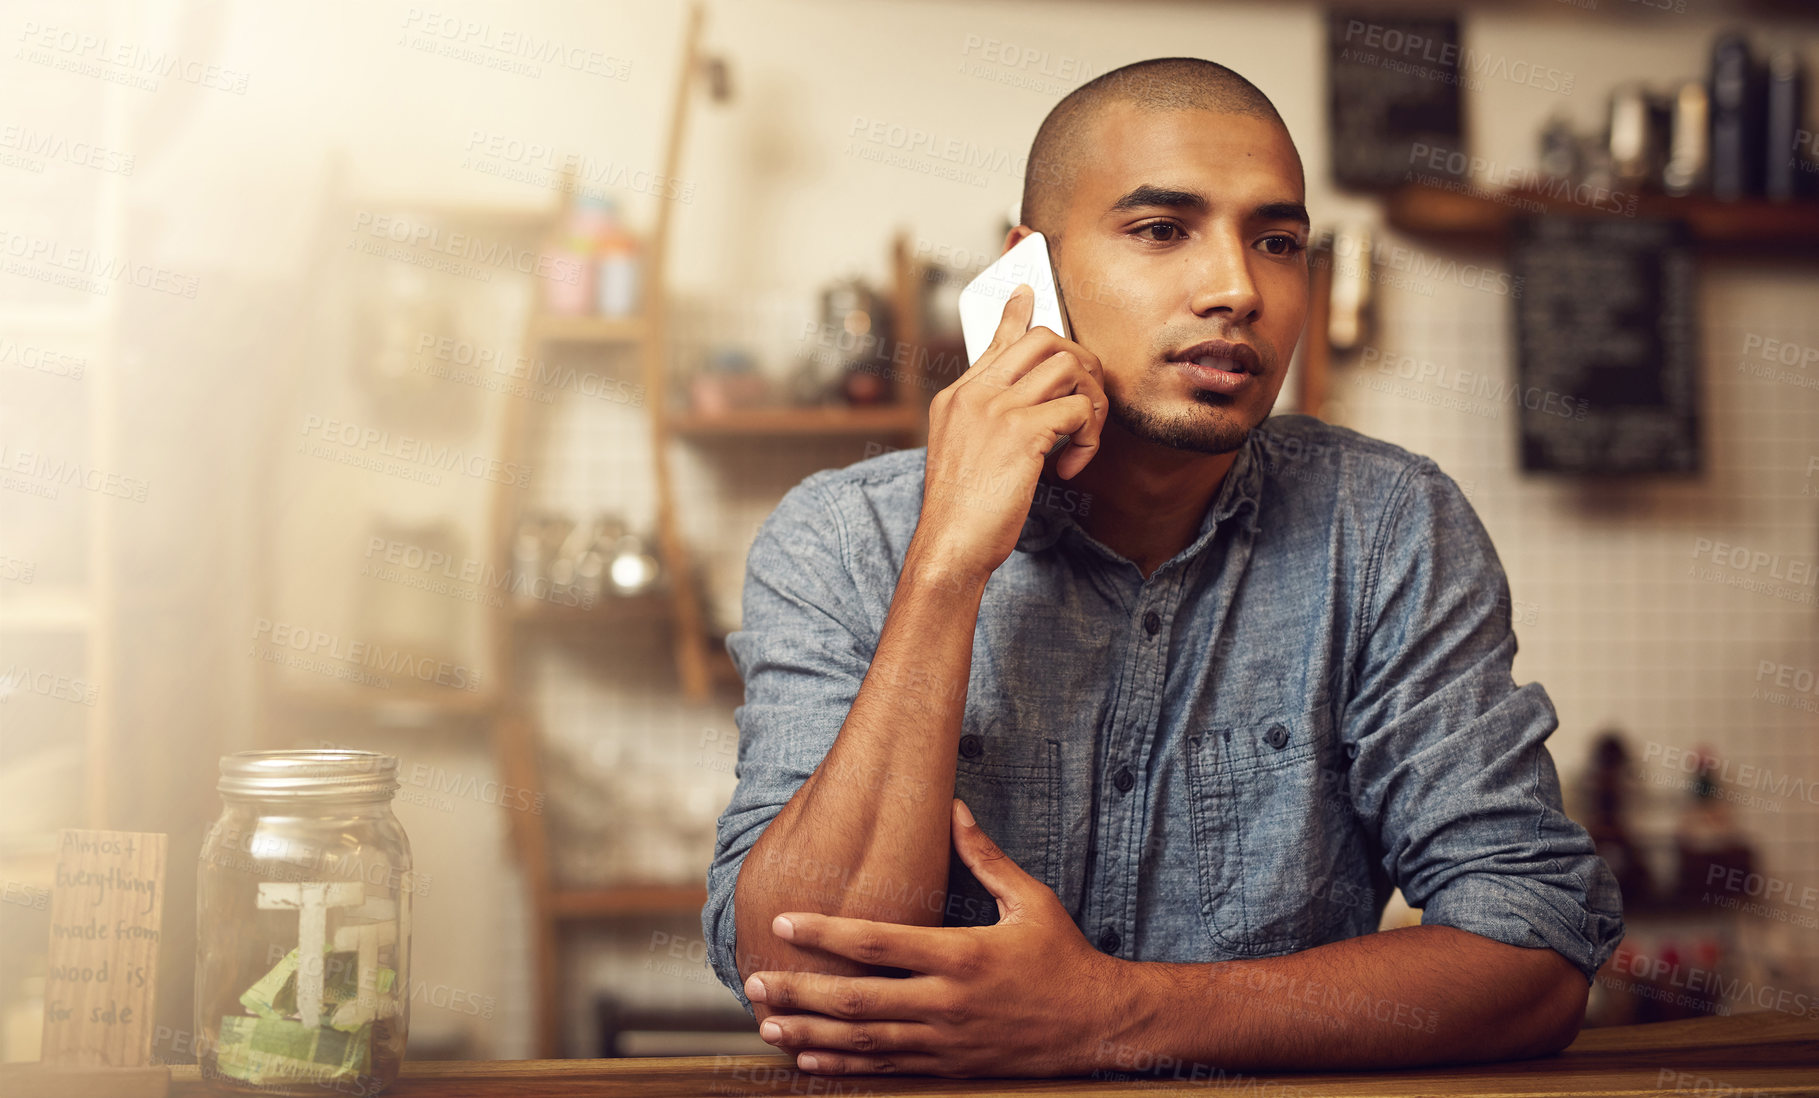 Buy stock photo Shot of a young entrepreneur using a phone in his store